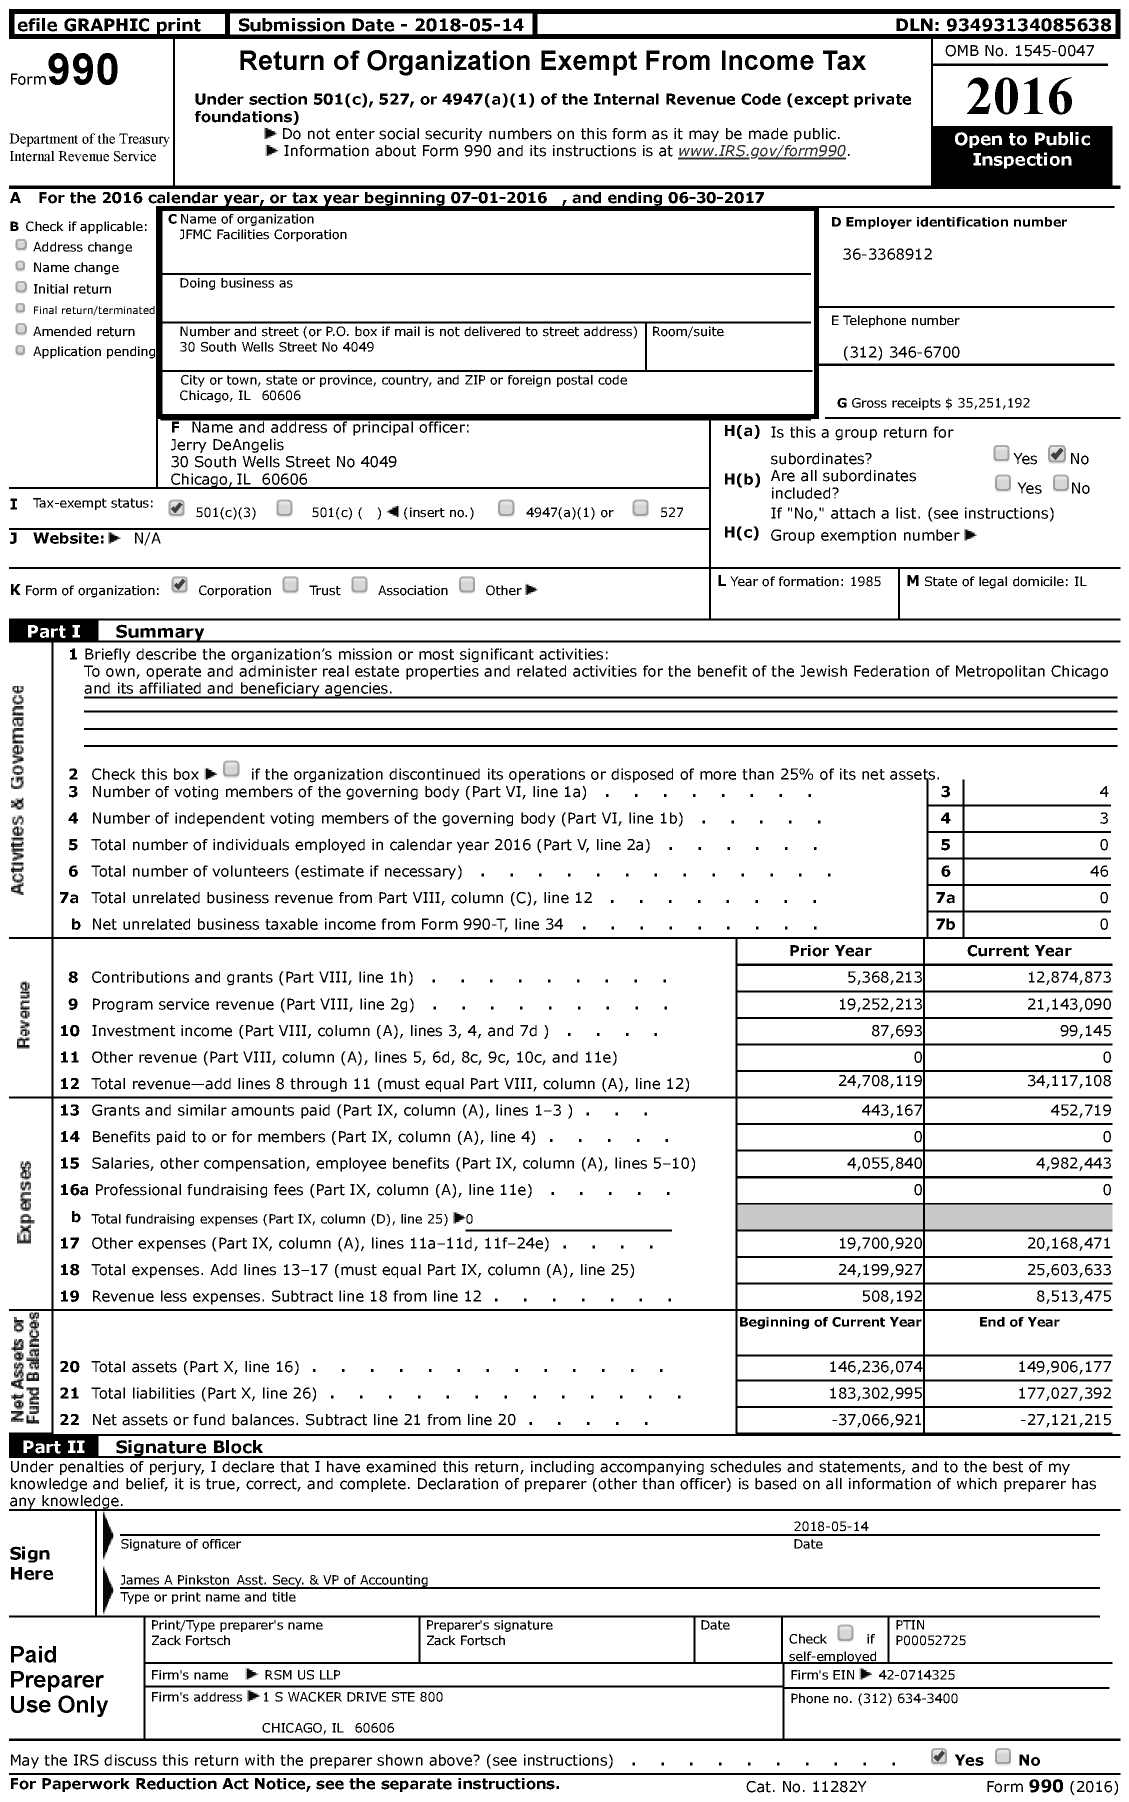 Image of first page of 2016 Form 990 for JFMC Facilities Corporation